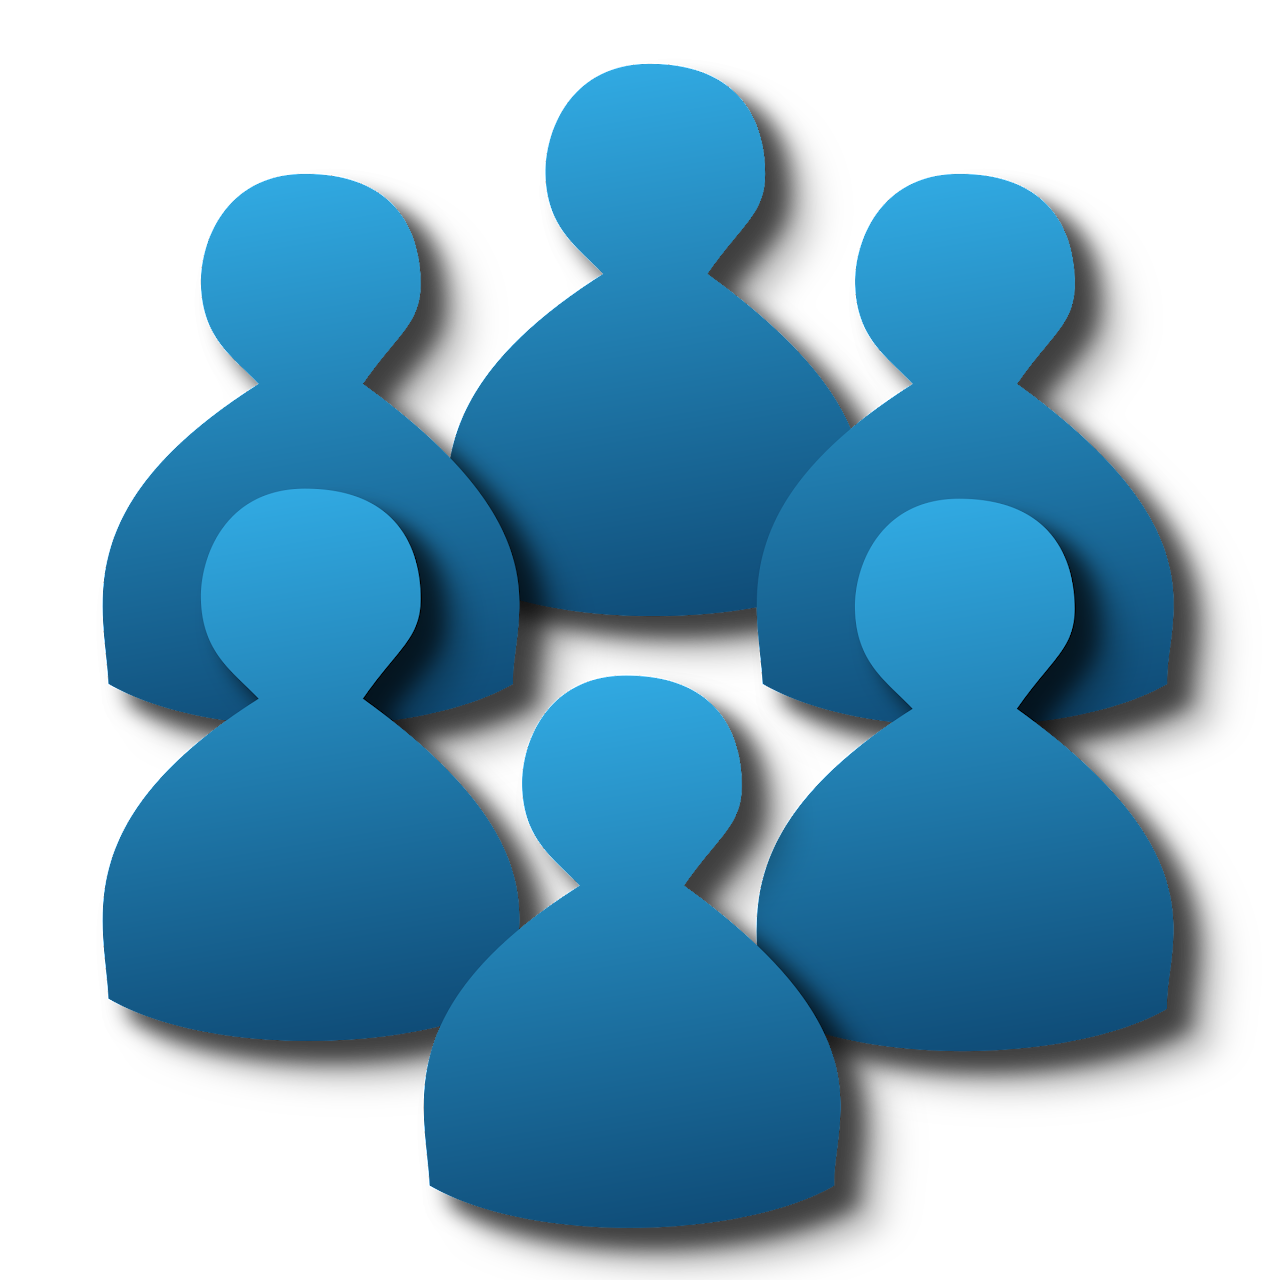 Animated image of a group of people.